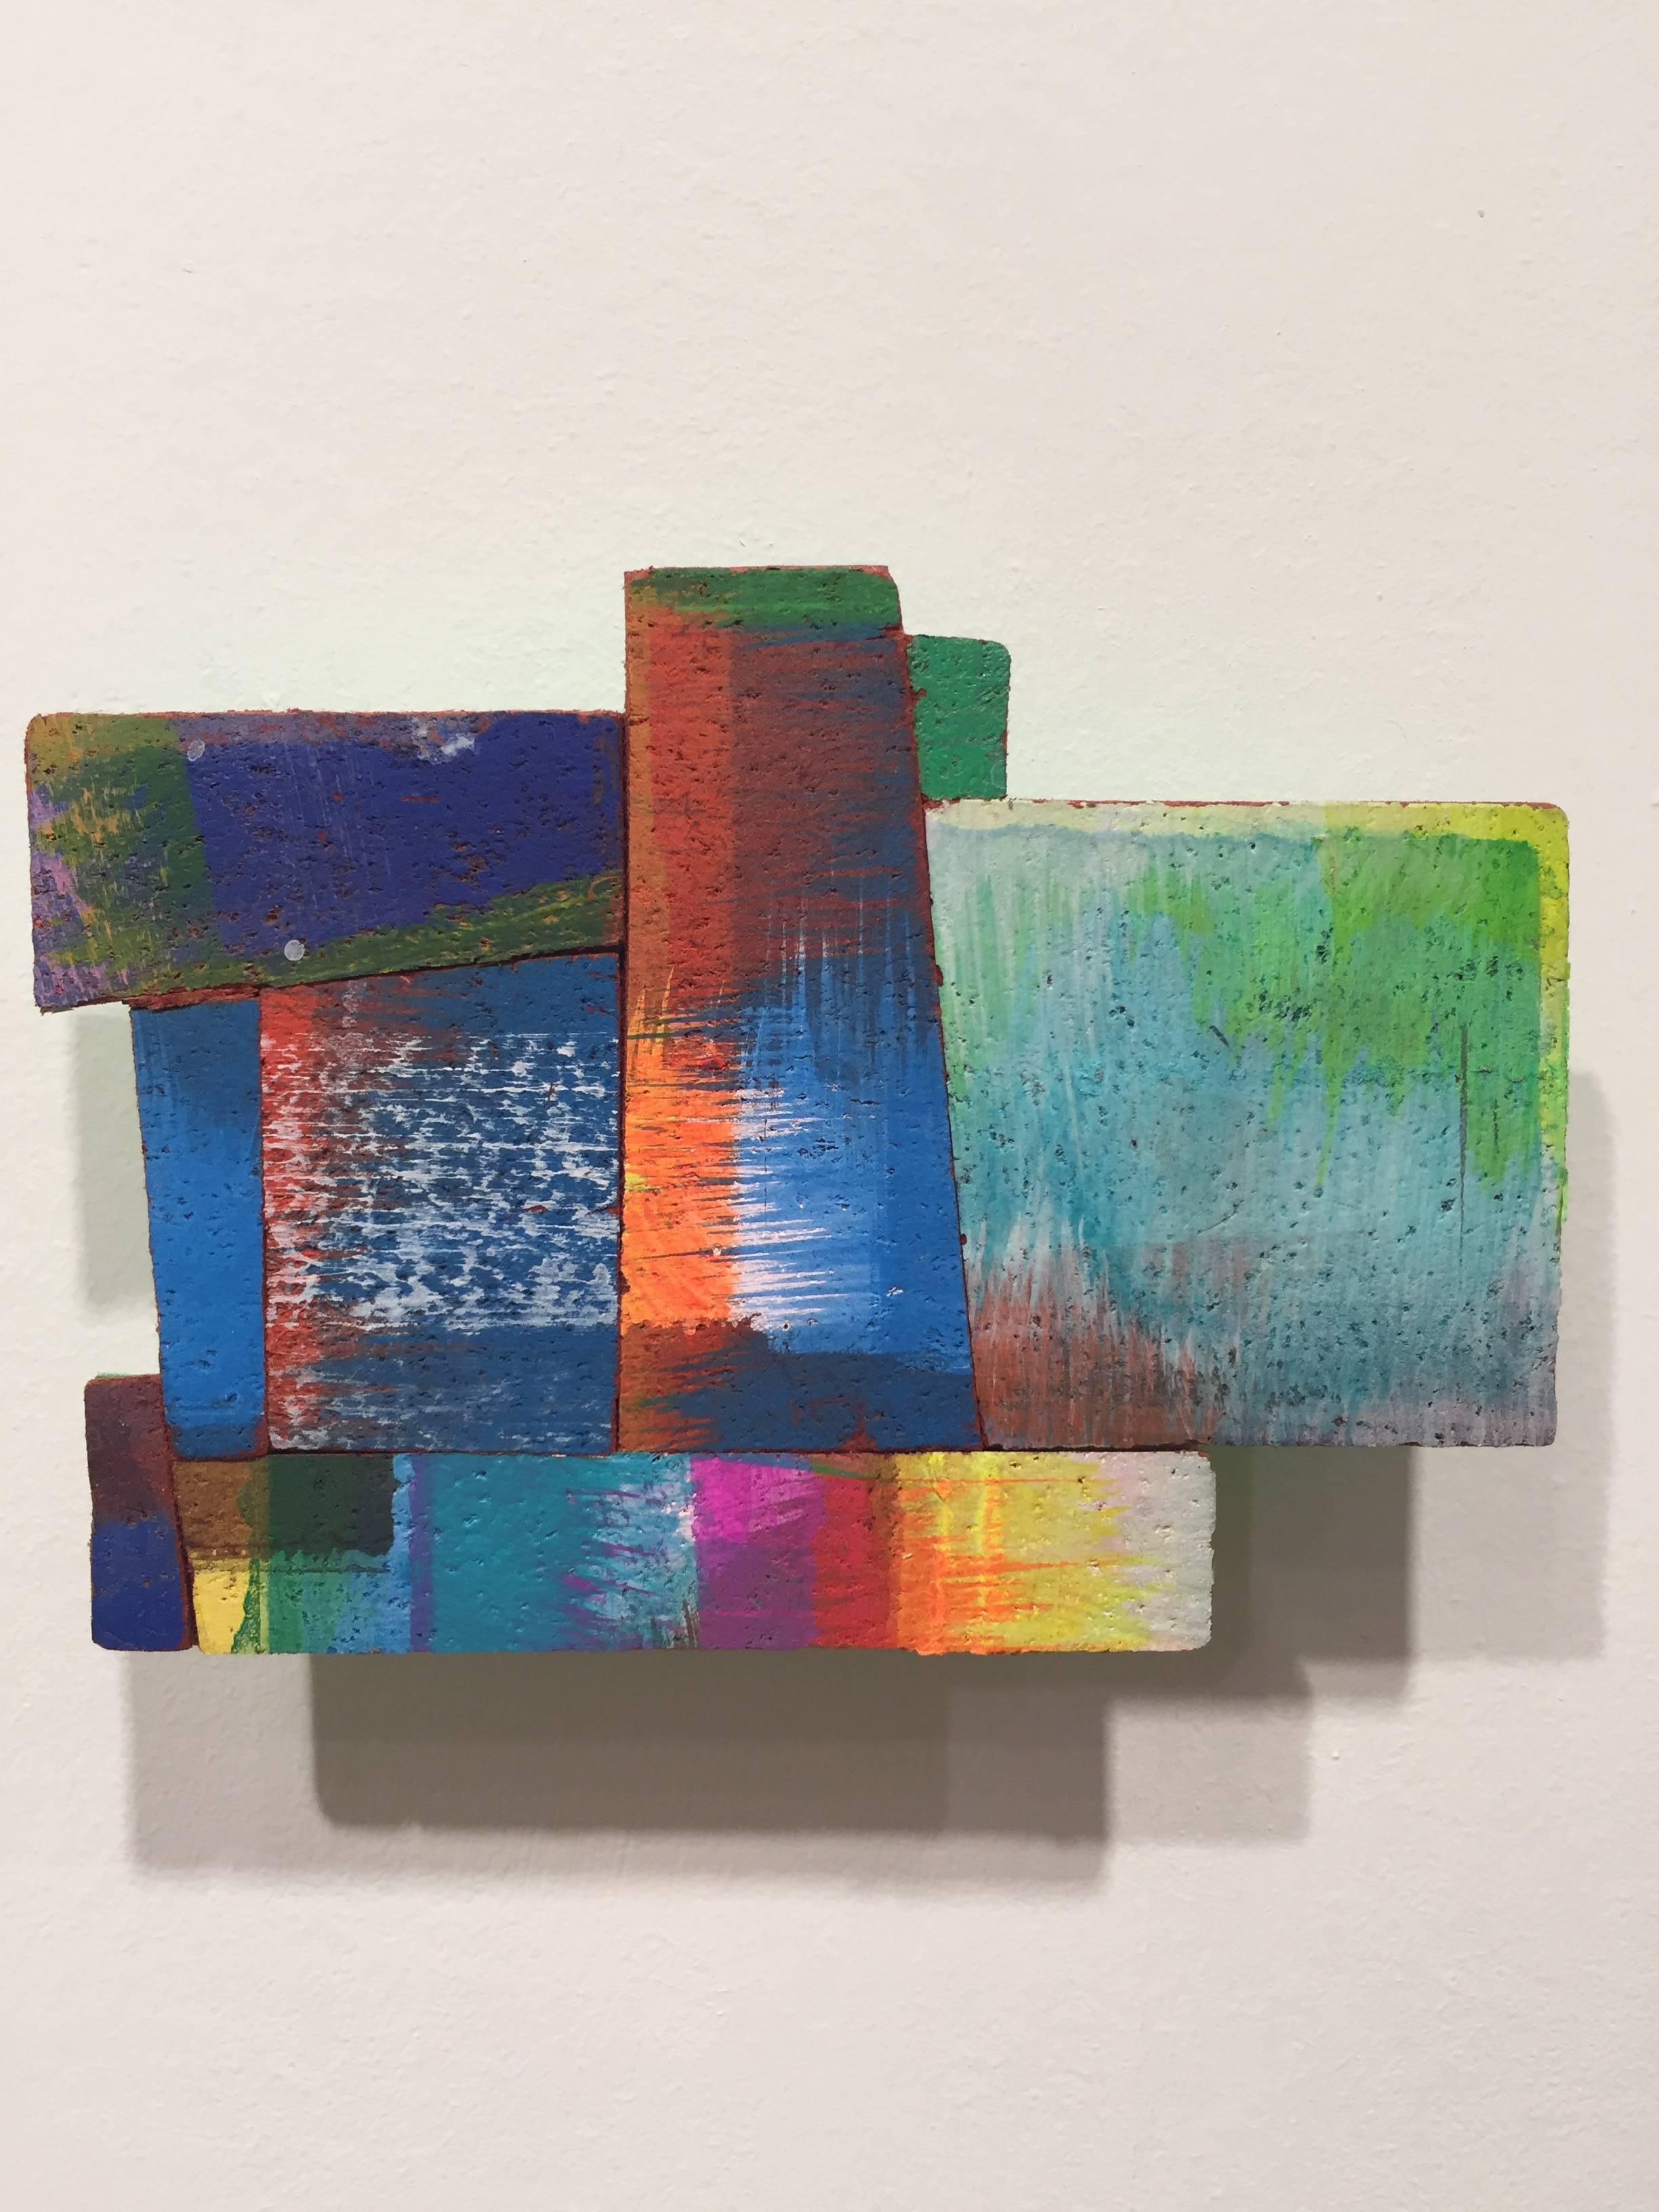 Joan Grubin Abstract Sculpture - Detritus #2, multicolored acrylic on pressed wood abstract wall sculpture, 2015